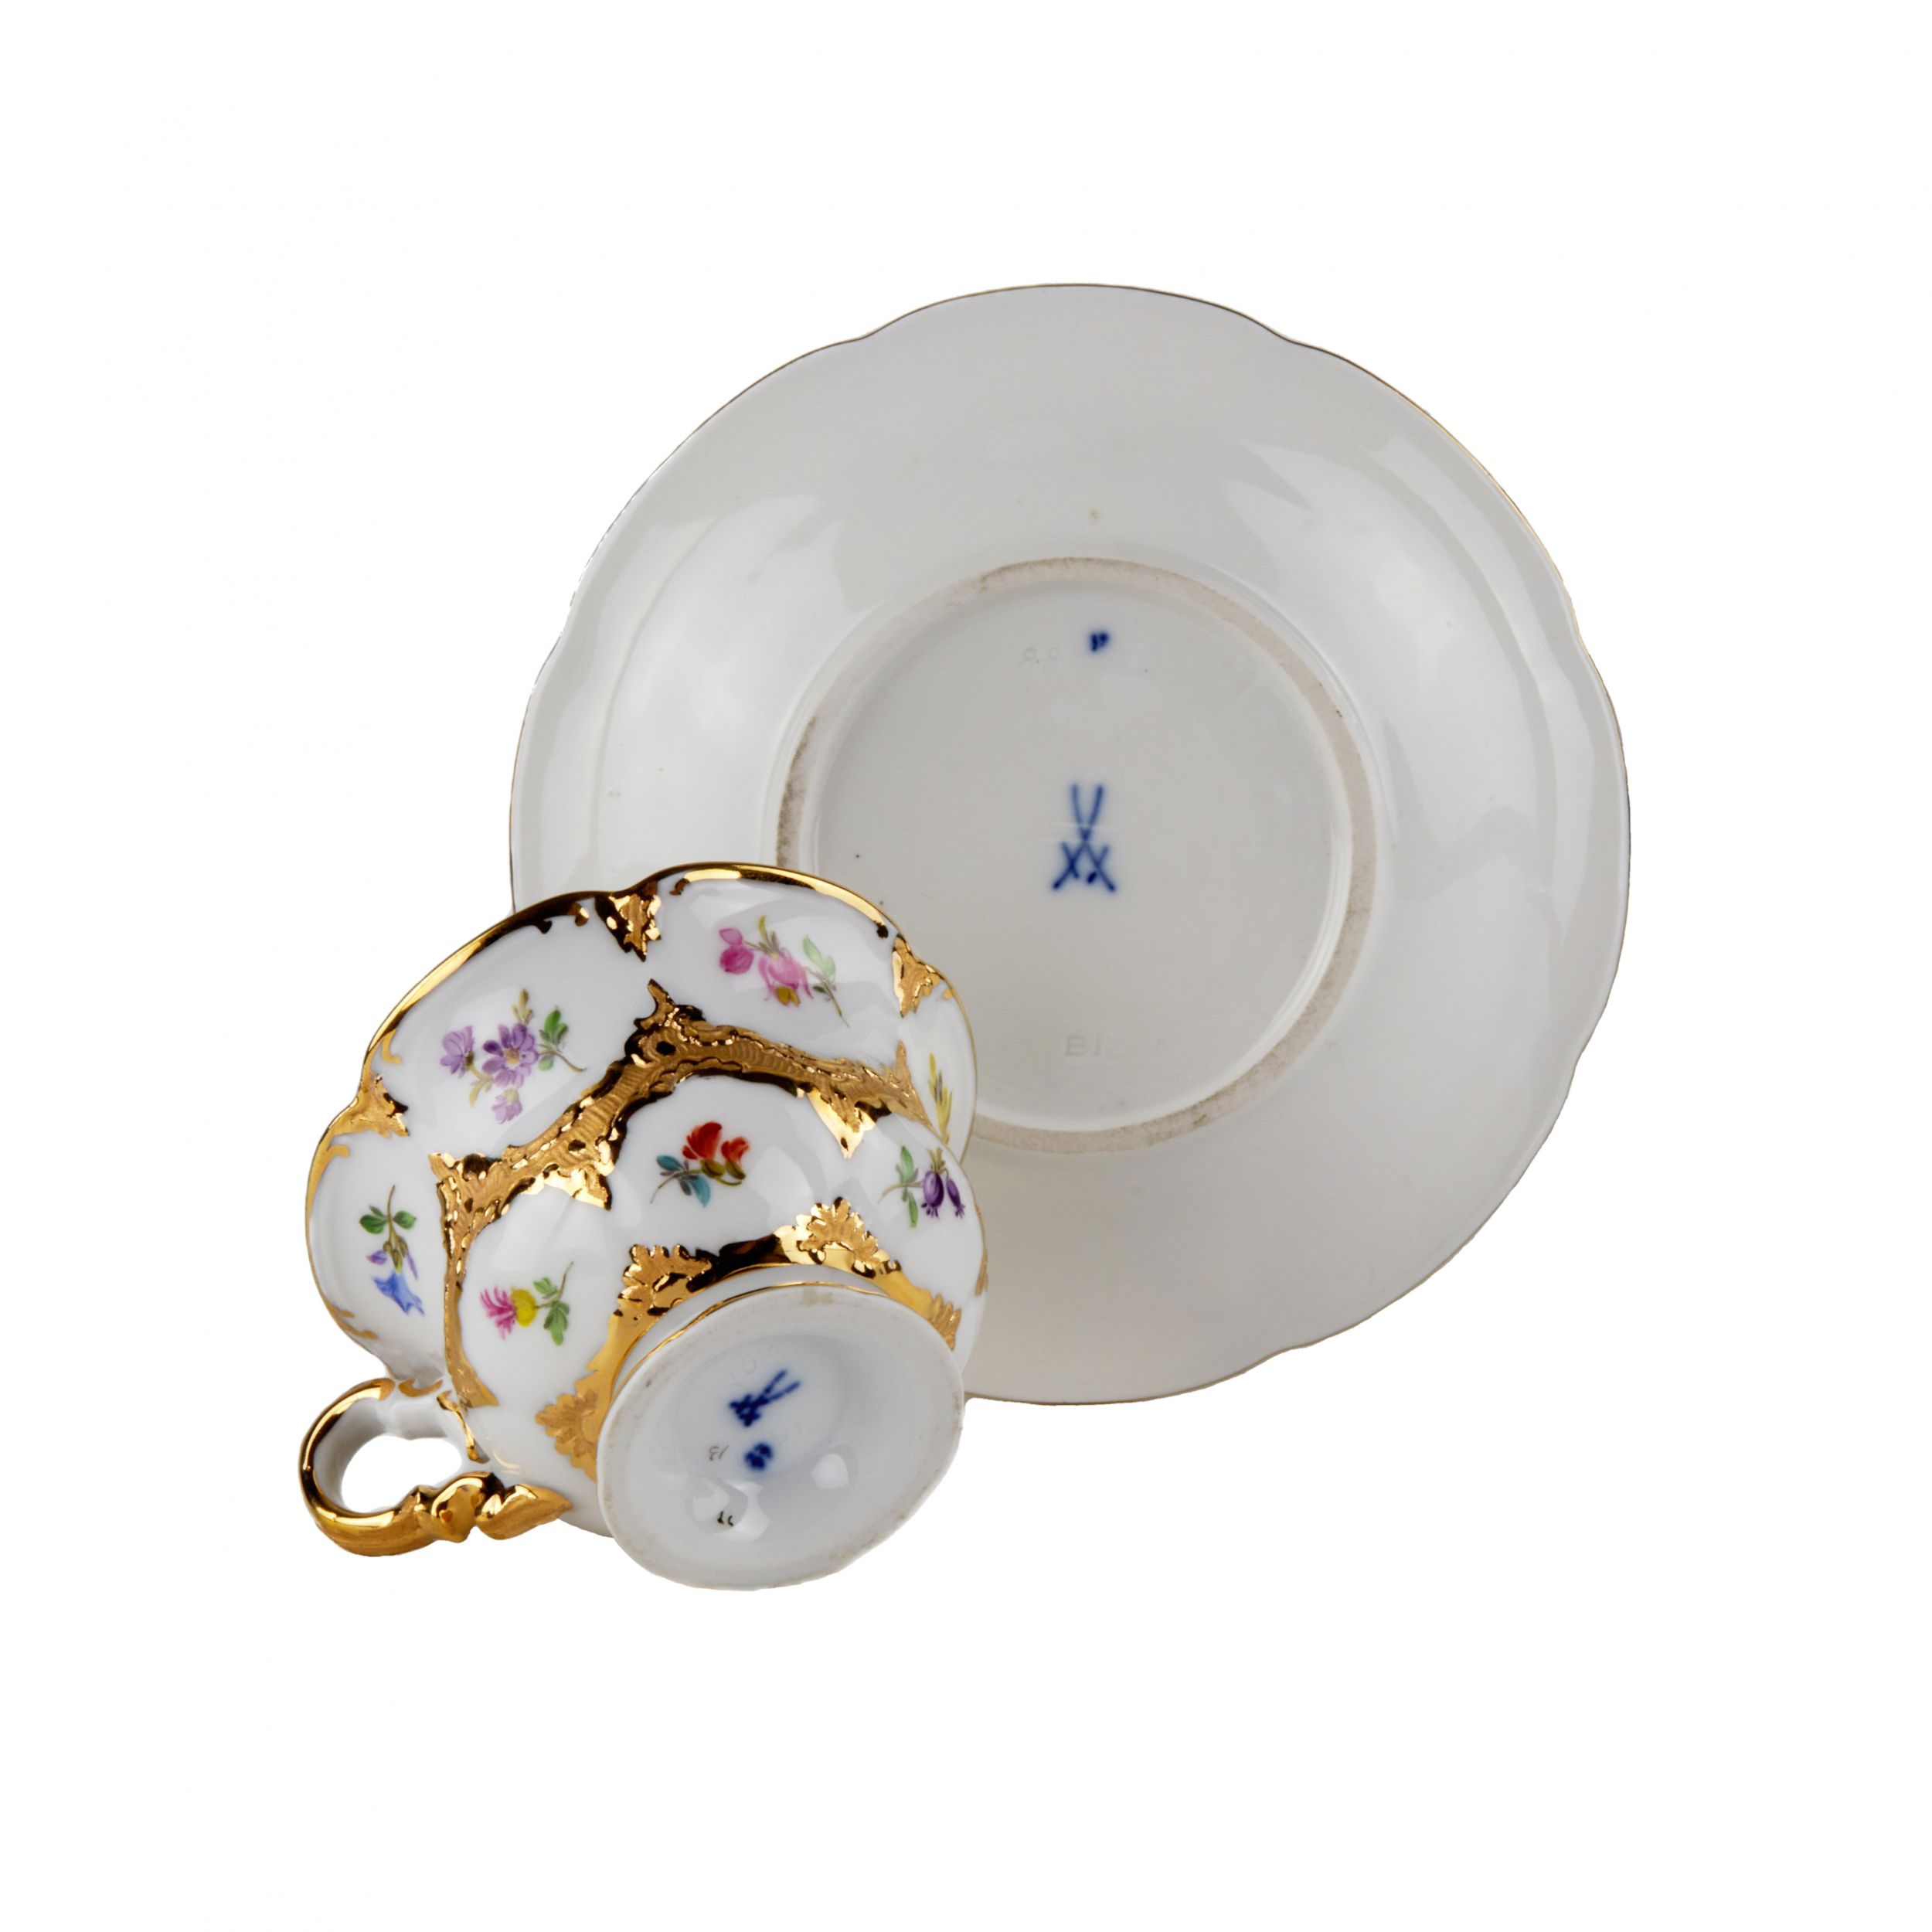 Meissen coffee service for 6 persons. - Image 5 of 9